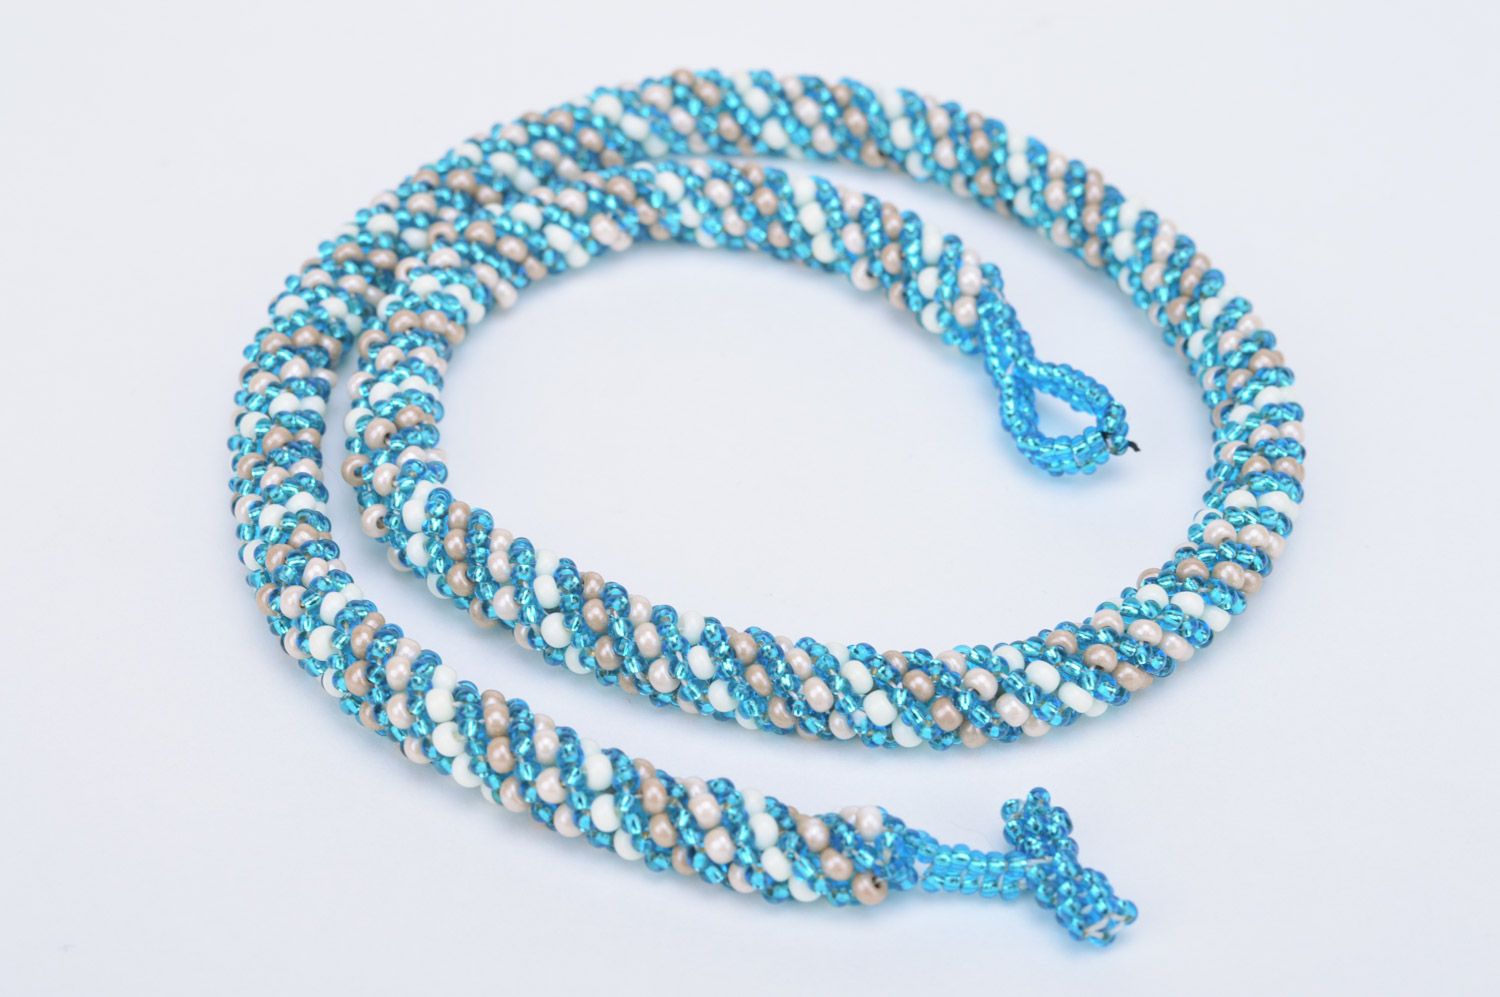 Handmade tender beaded cord necklace in blue and white colors for women photo 5